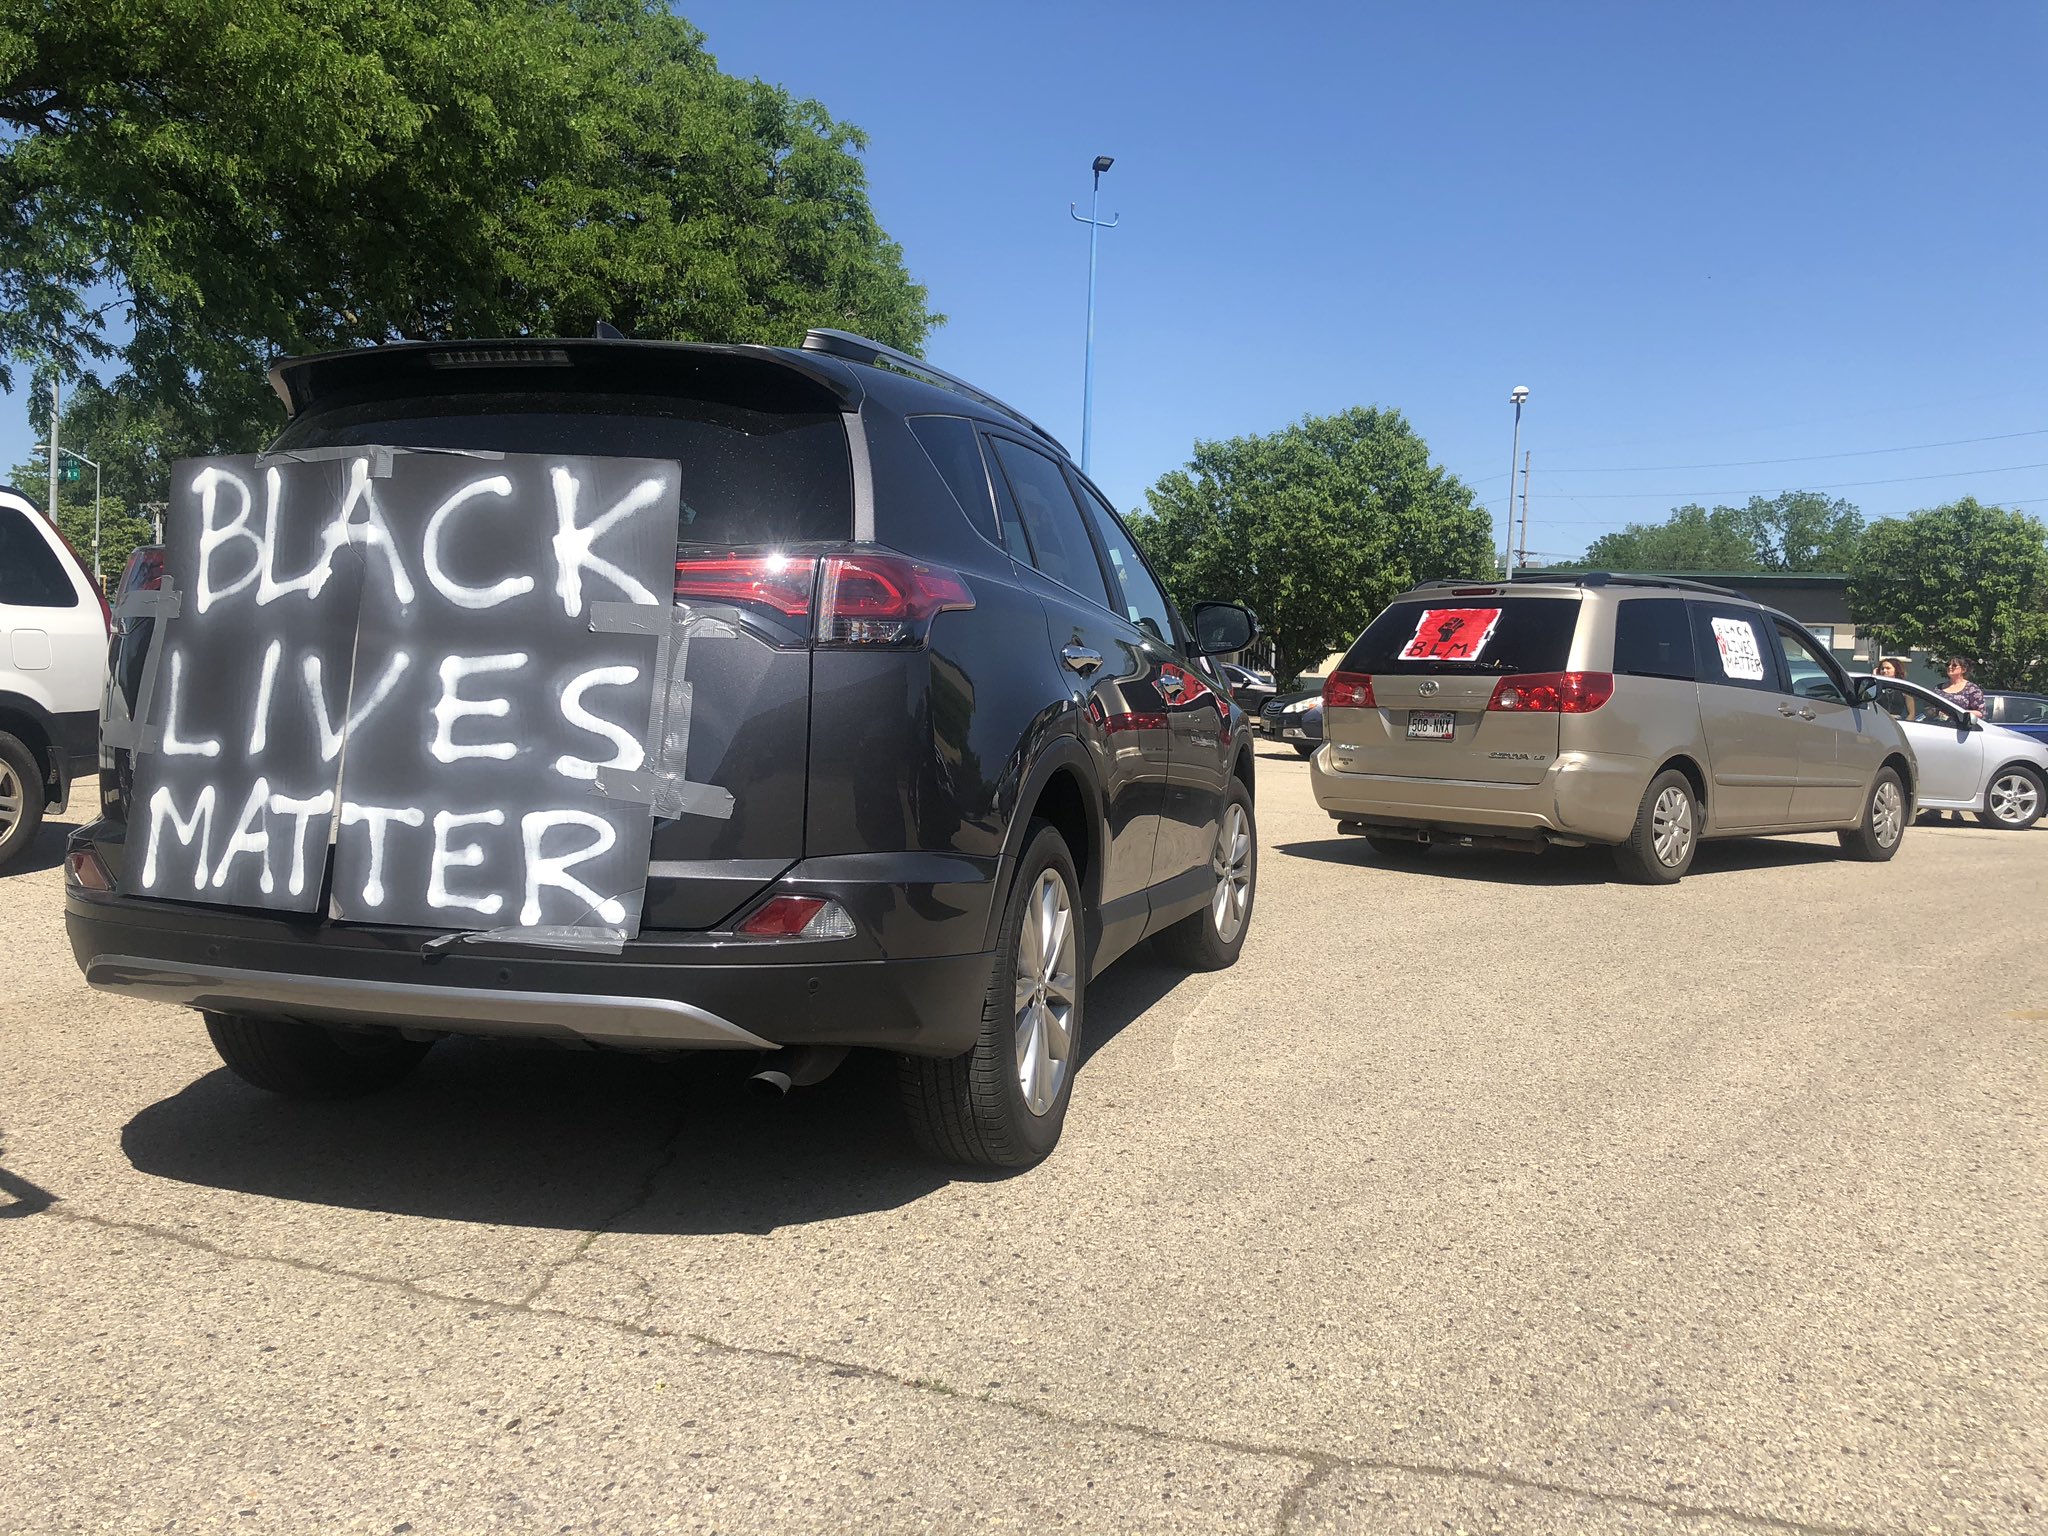 Black Lives Matter protesters participated in another car caravan